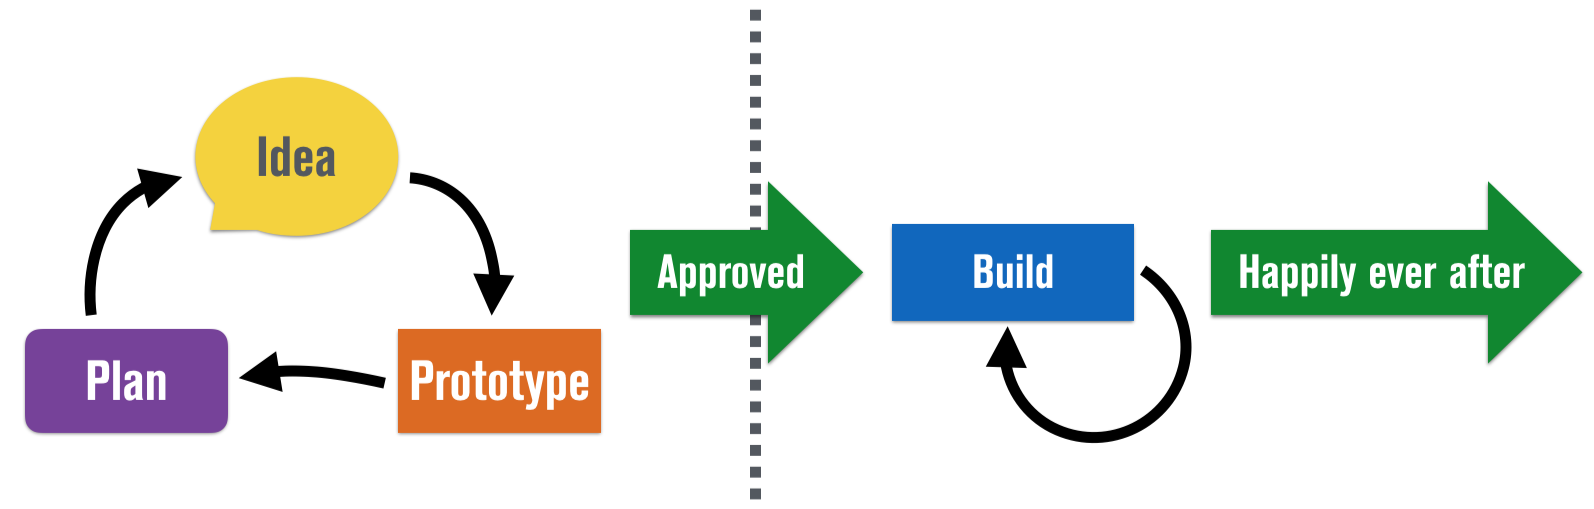 Community Innovation Ideas Approval Workflow